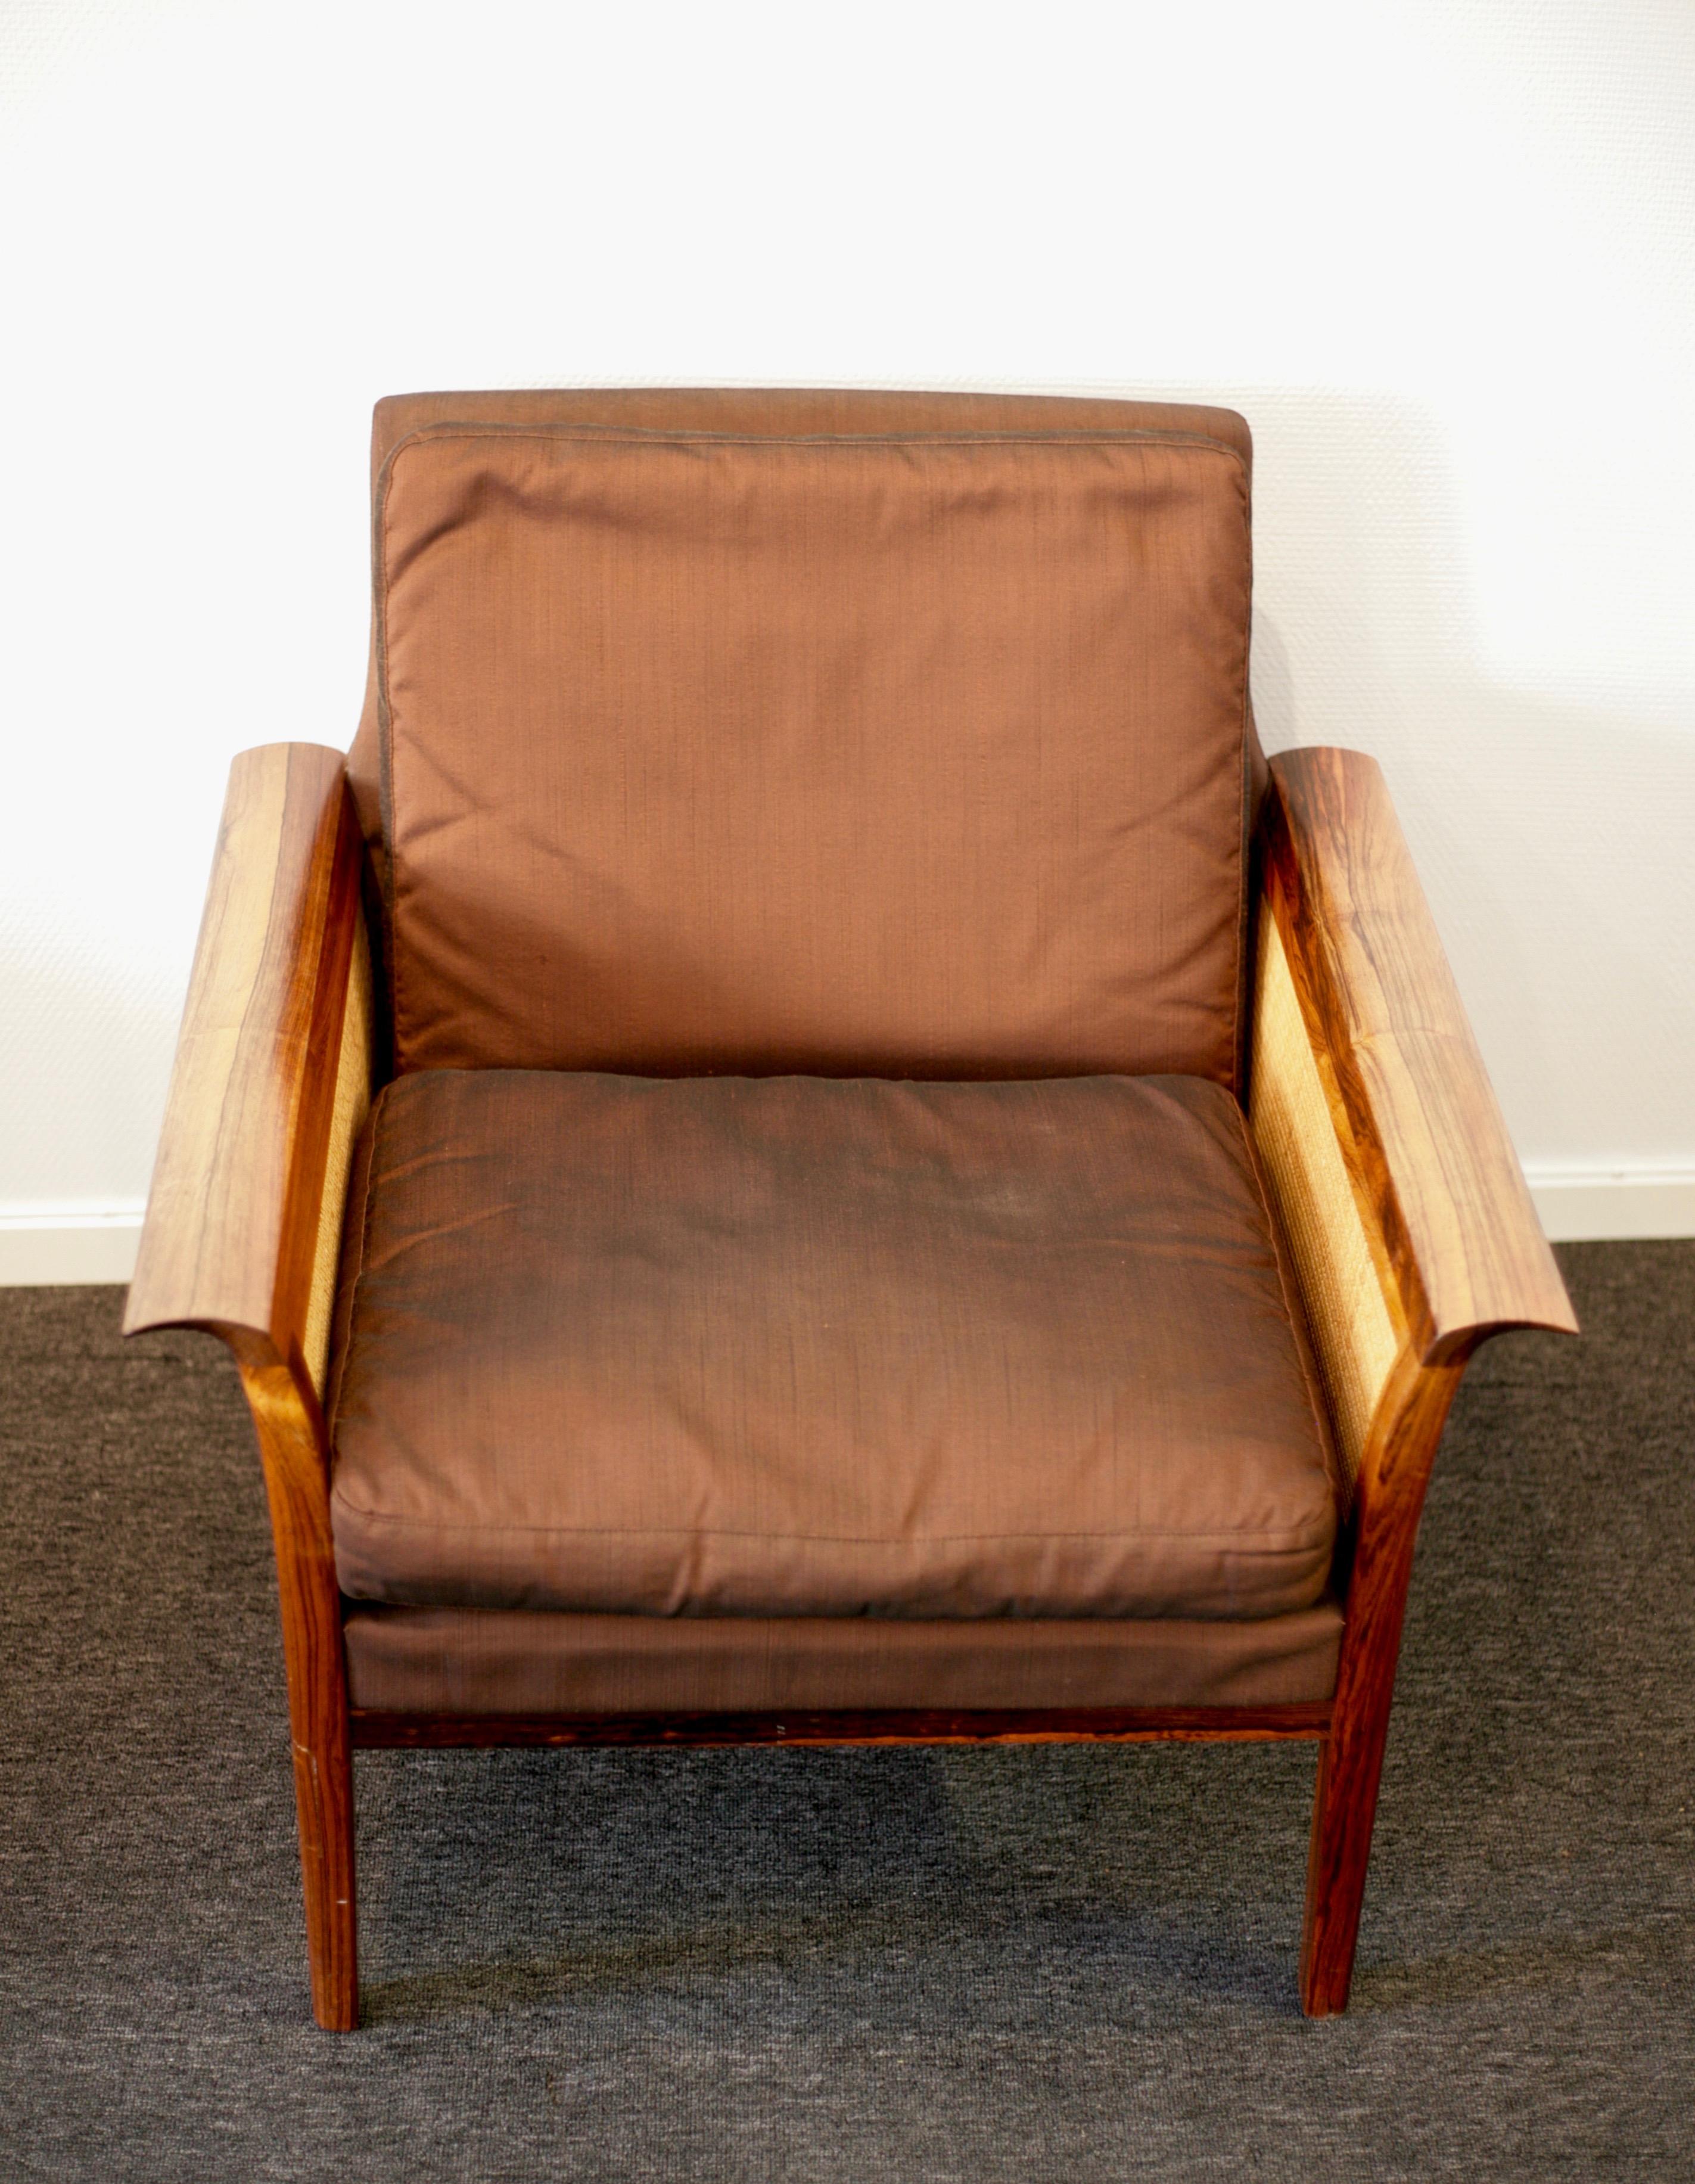 2 easy chairs designed by Hans Olsen for Vatne in Norway. Solid rosewood and rattan. Upholstery in a stylish copper colored Thai silk. Rattan without damages and normal wear to wood. Upholstery in good condition. New cushions. Cites certificate